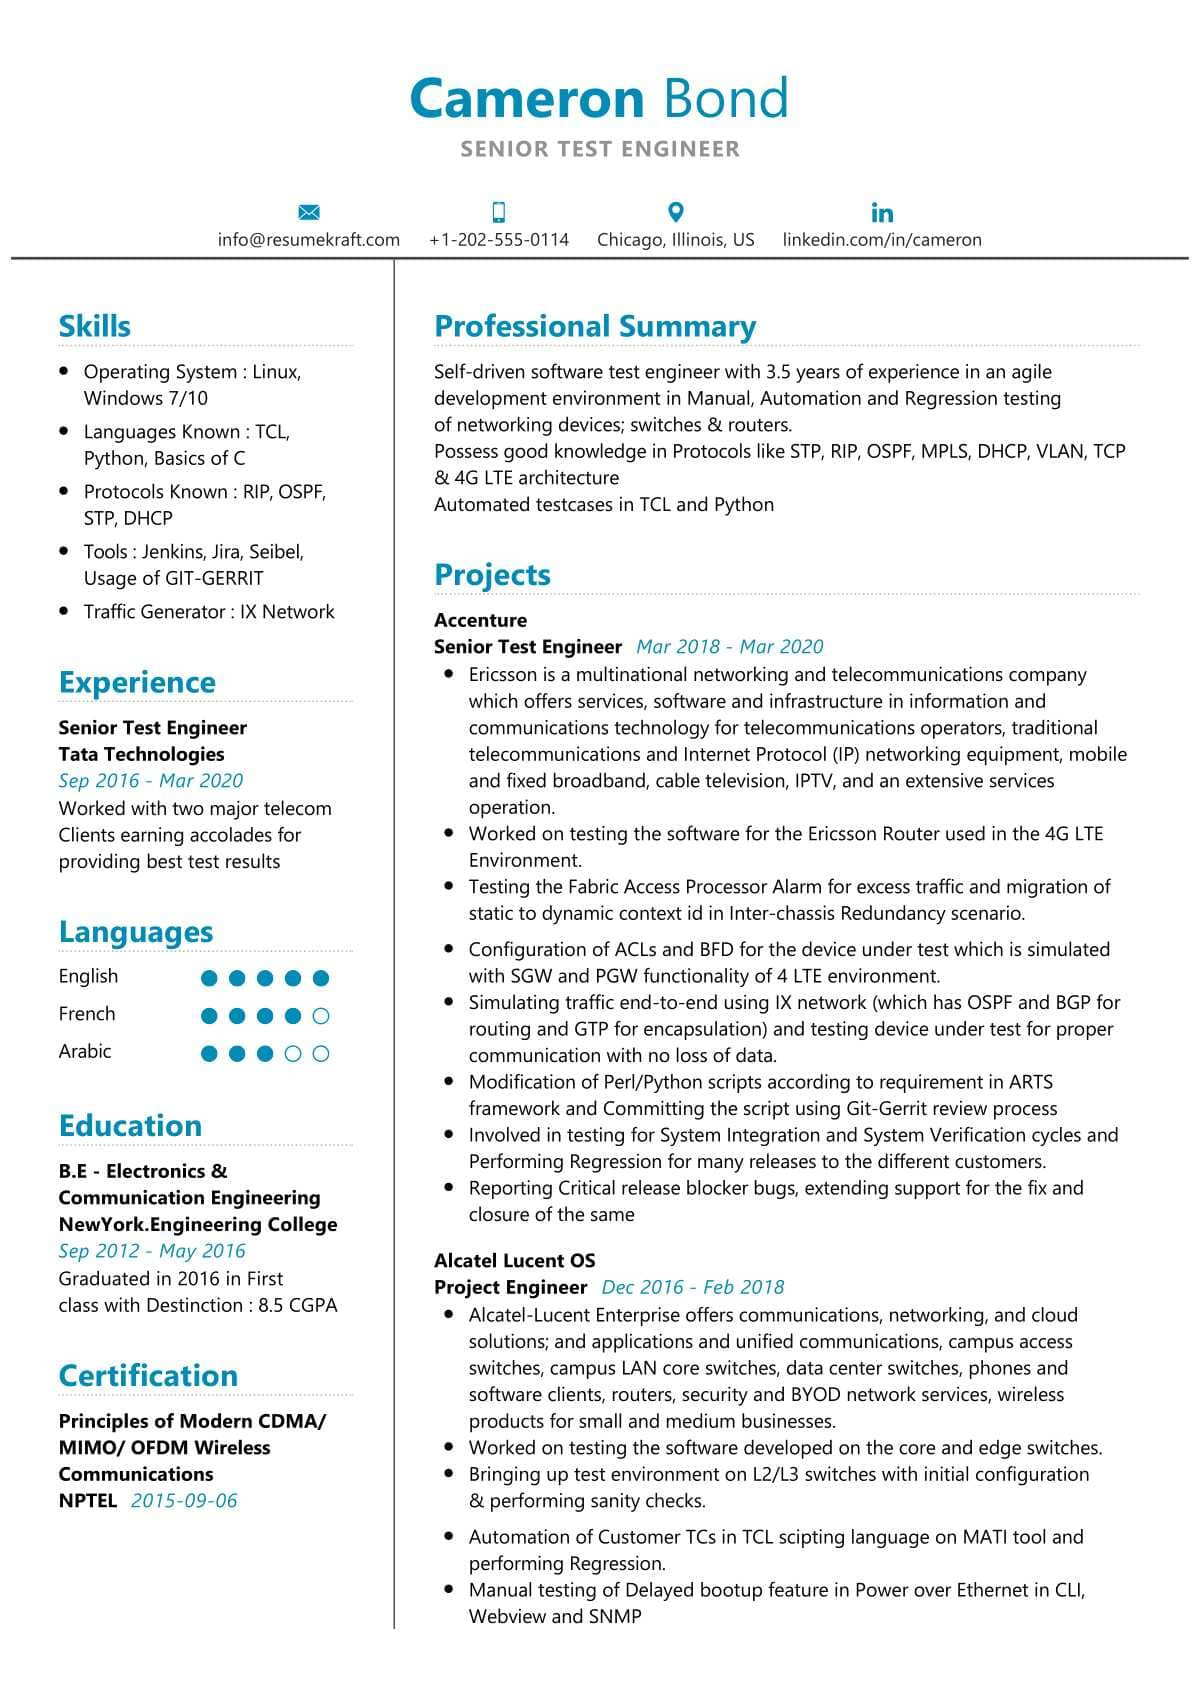 Build and Release Engineer Resume Samples Senior Test Engineer Resume Sample 2022 Writing Tips – Resumekraft